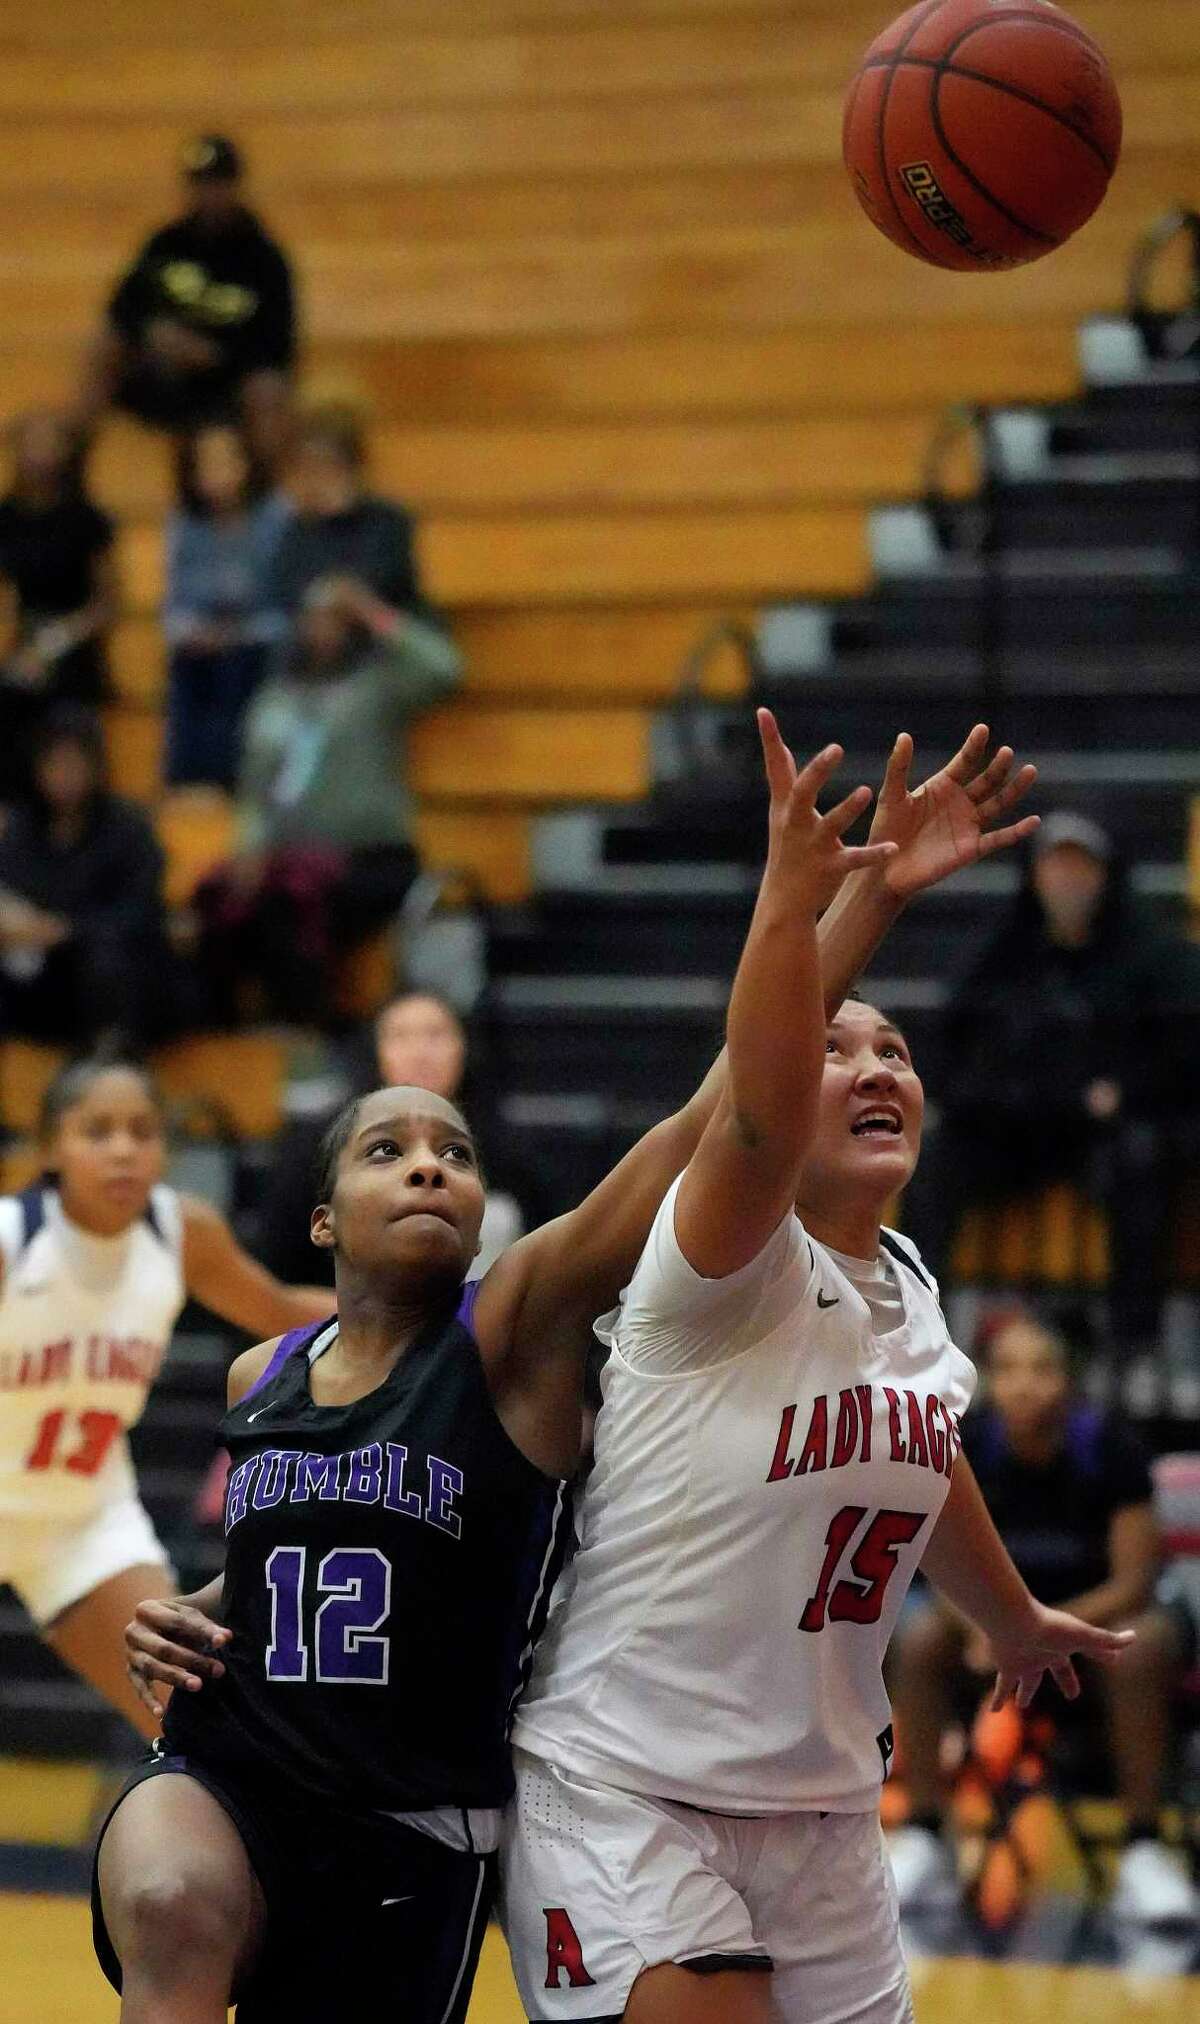 Humble High School's Krystal Cross (12) and Atascocita High School's Zoiey Jumawan (15) reach for a rebound during the second half of a District 21-6A high school girls basketball game at Atascocita High School on Wednesday, Jan. 4, 2023 in Humble.